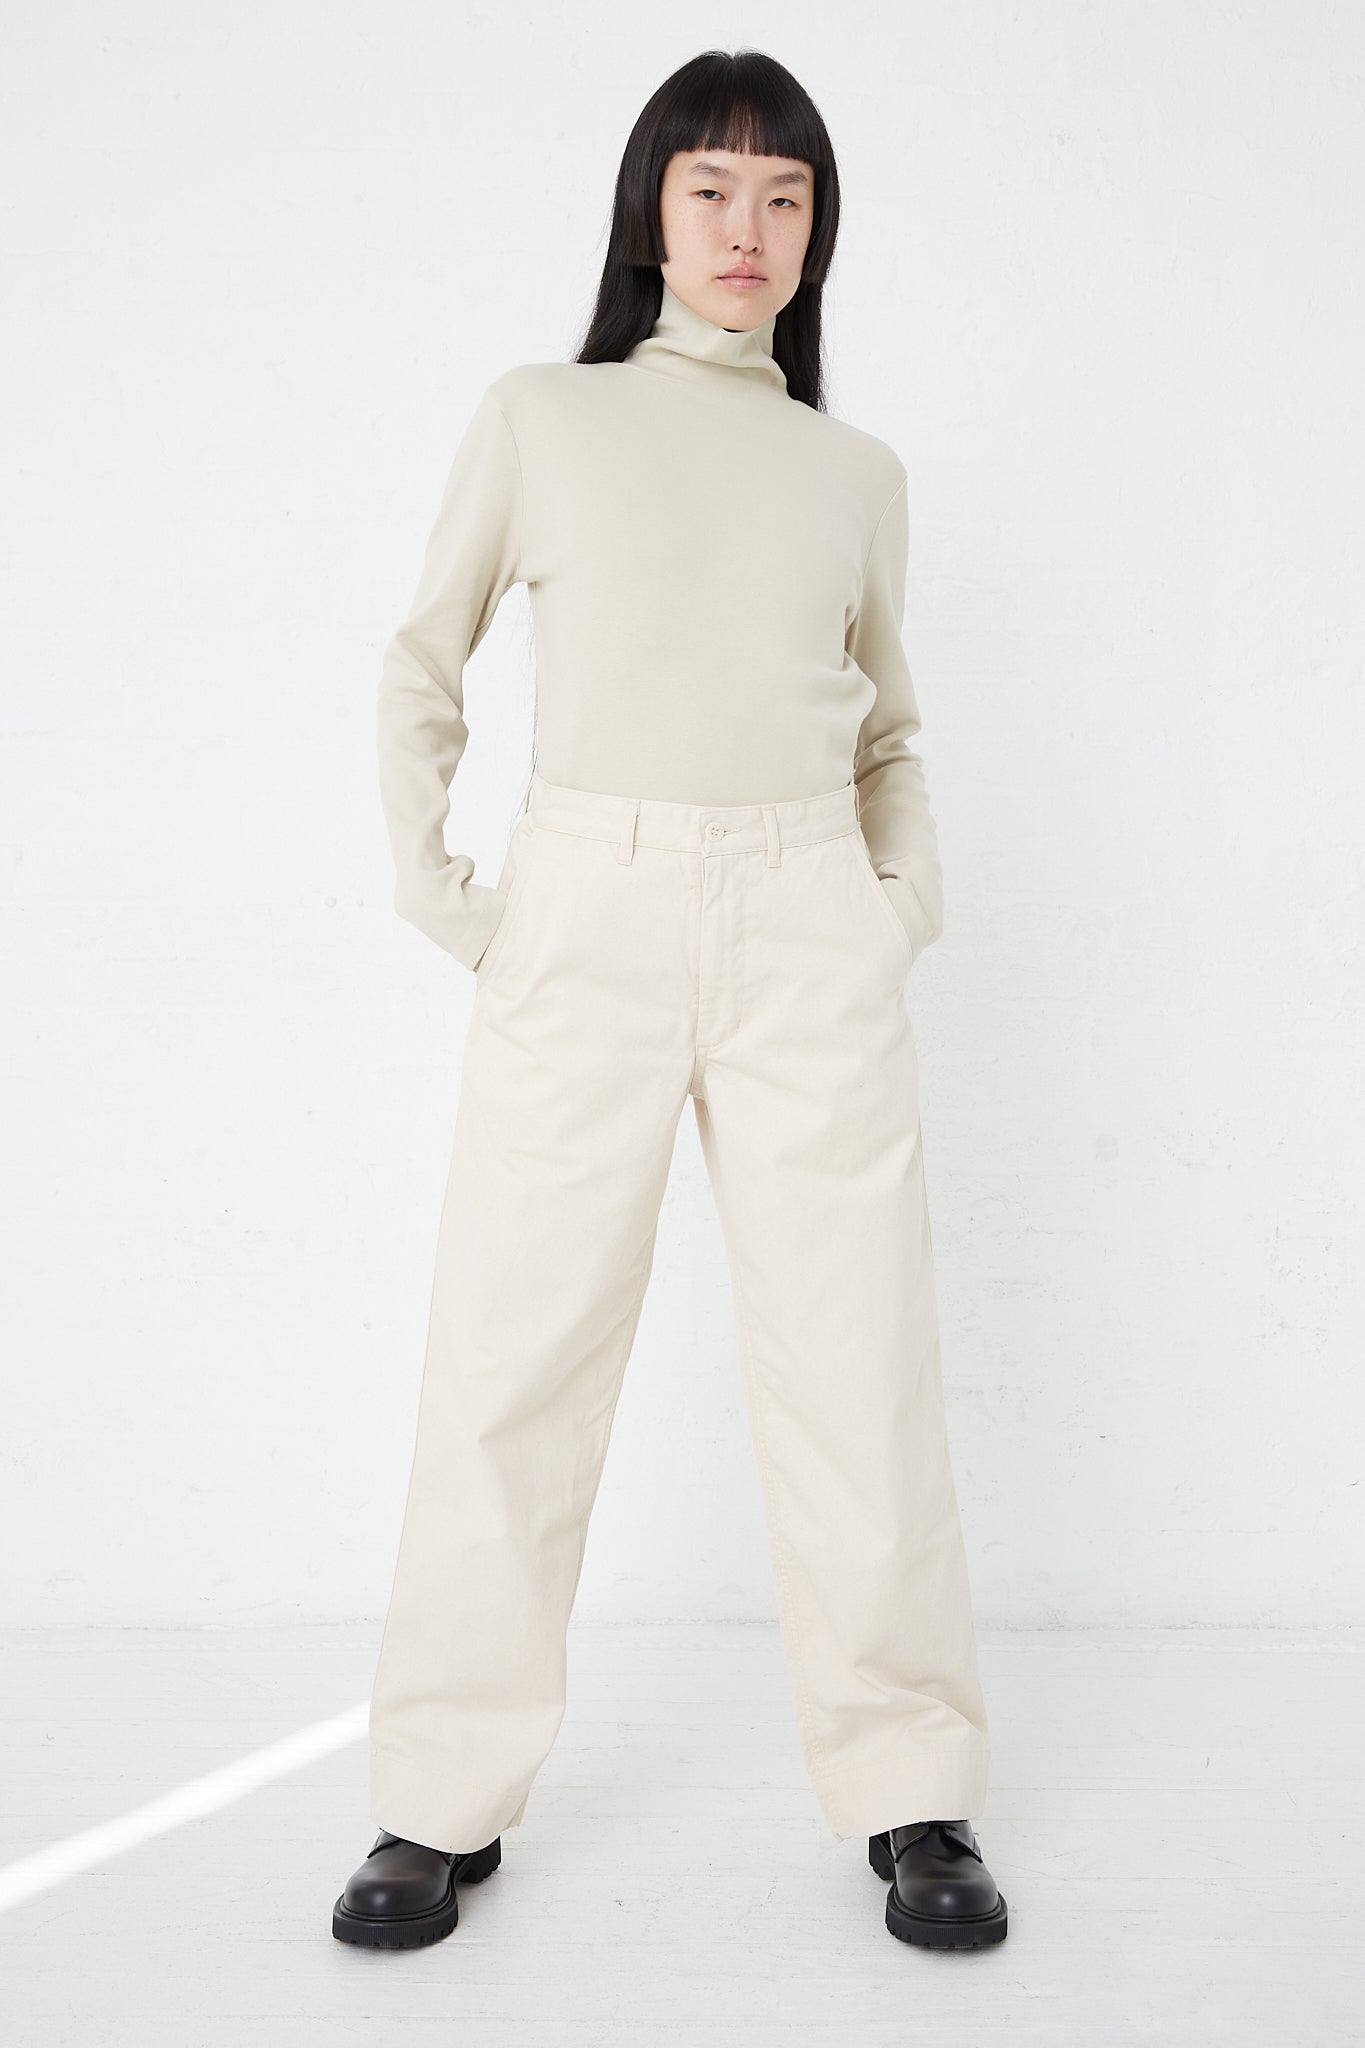 A woman wearing As Ever's 51 Chino in Natural wide leg pants in beige.